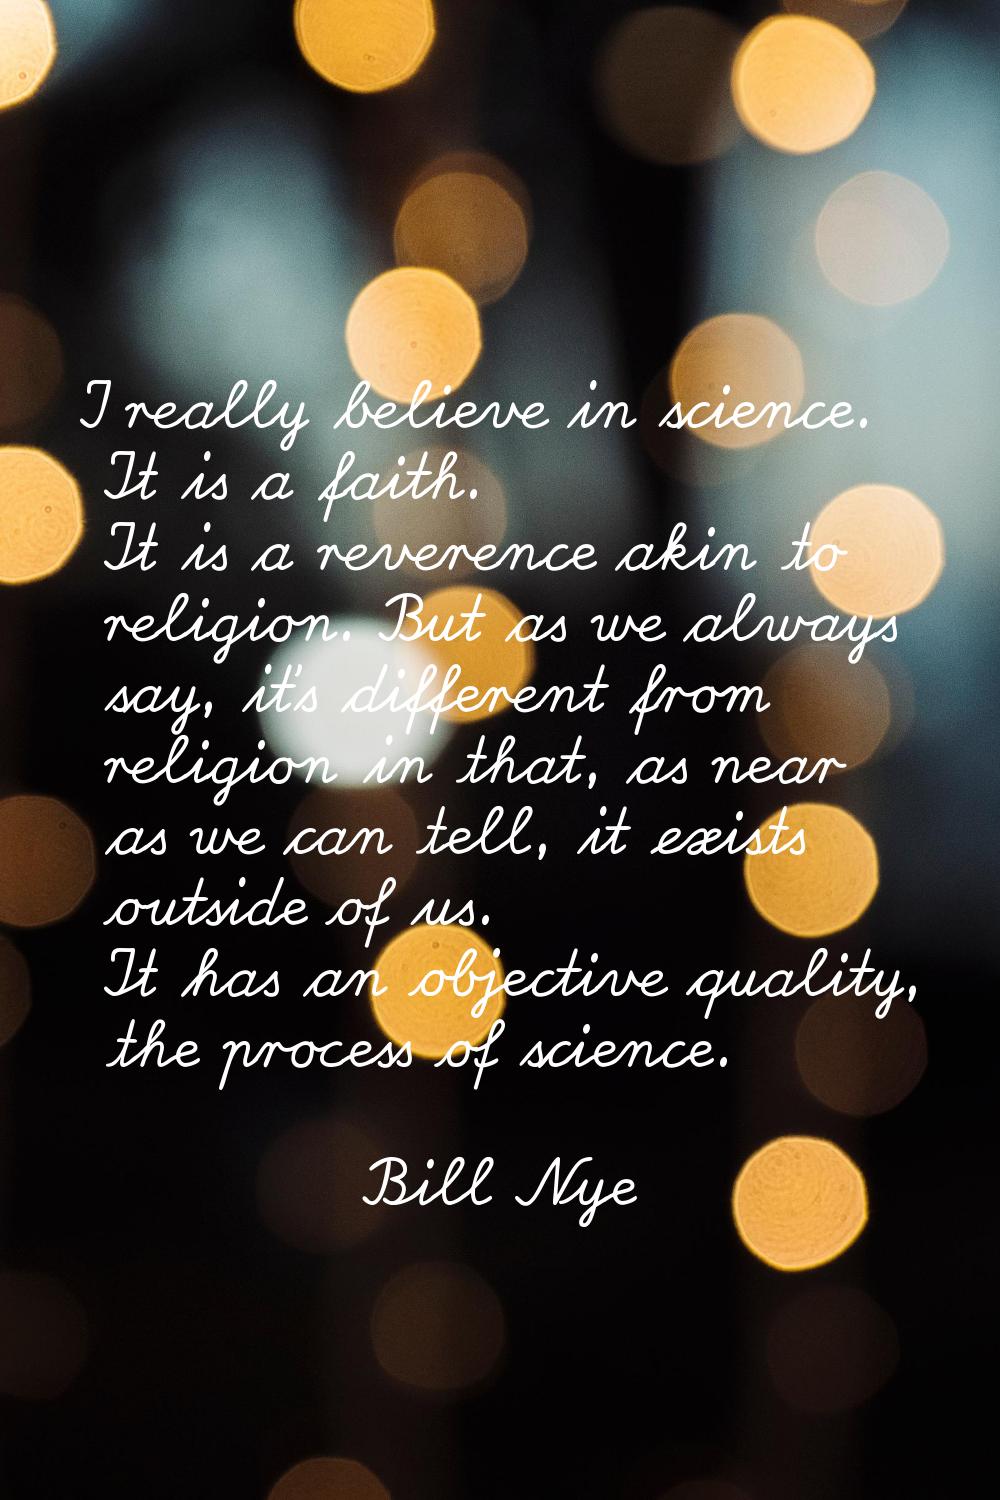 I really believe in science. It is a faith. It is a reverence akin to religion. But as we always sa